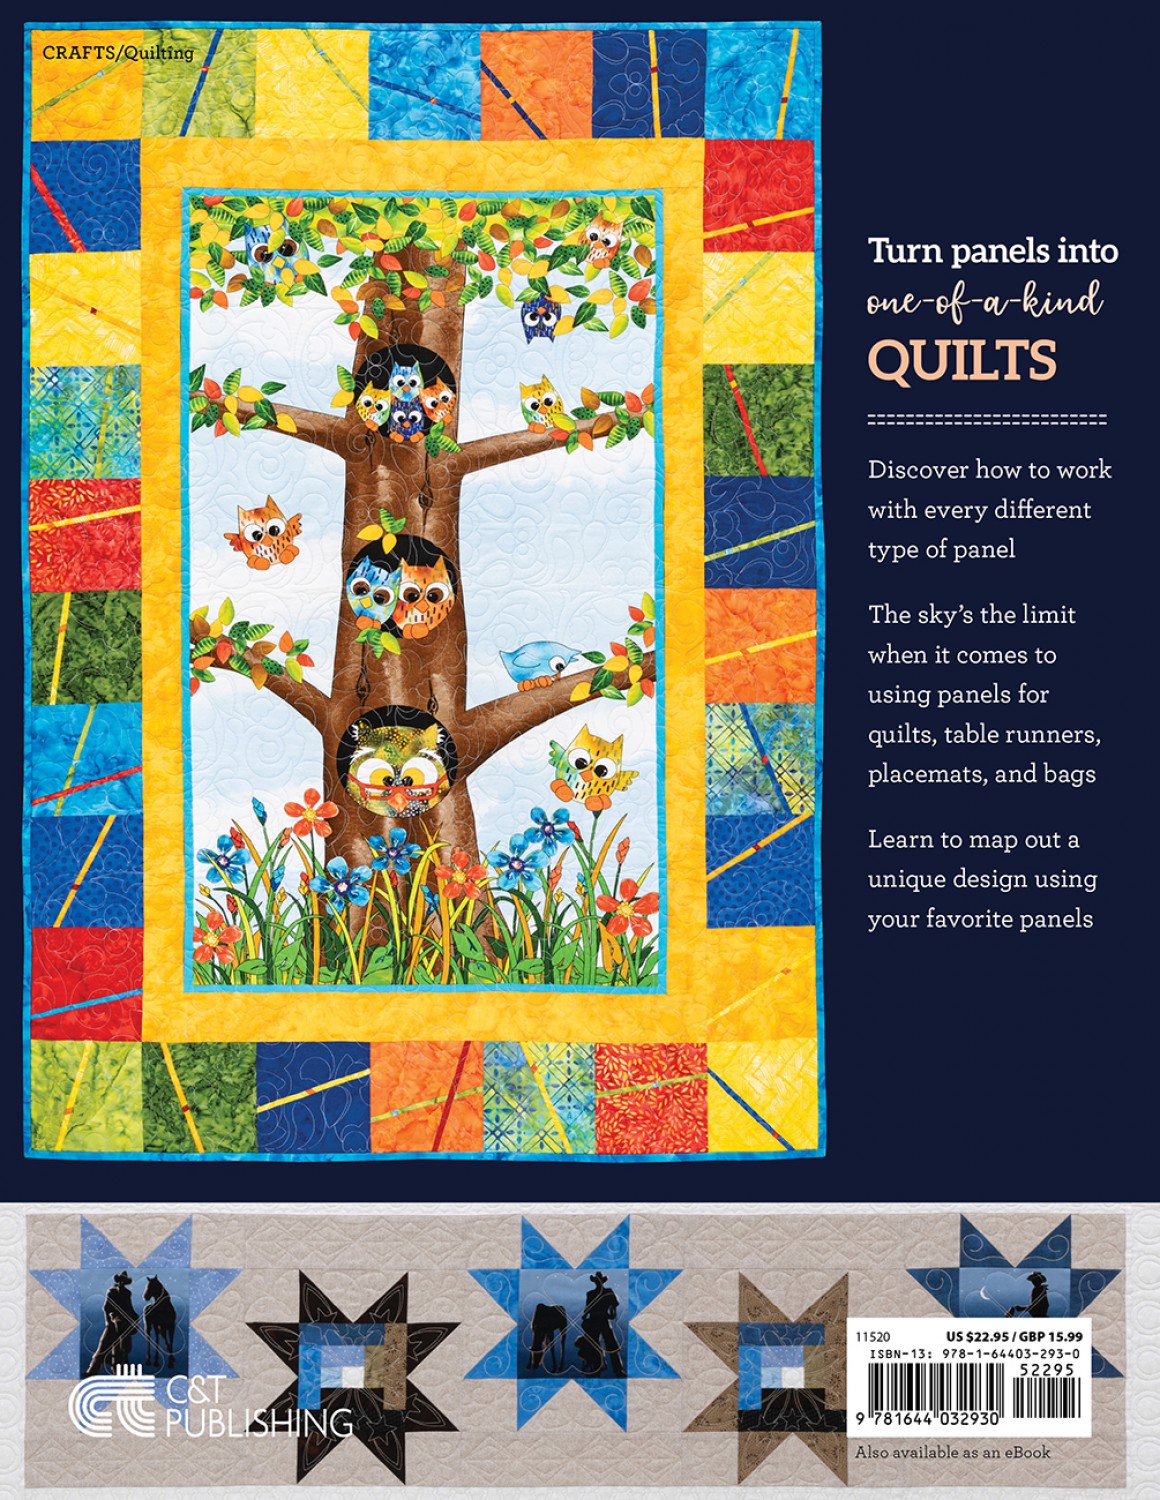 Fun with Panels: Turn panels into one-of-a-kind quilts!